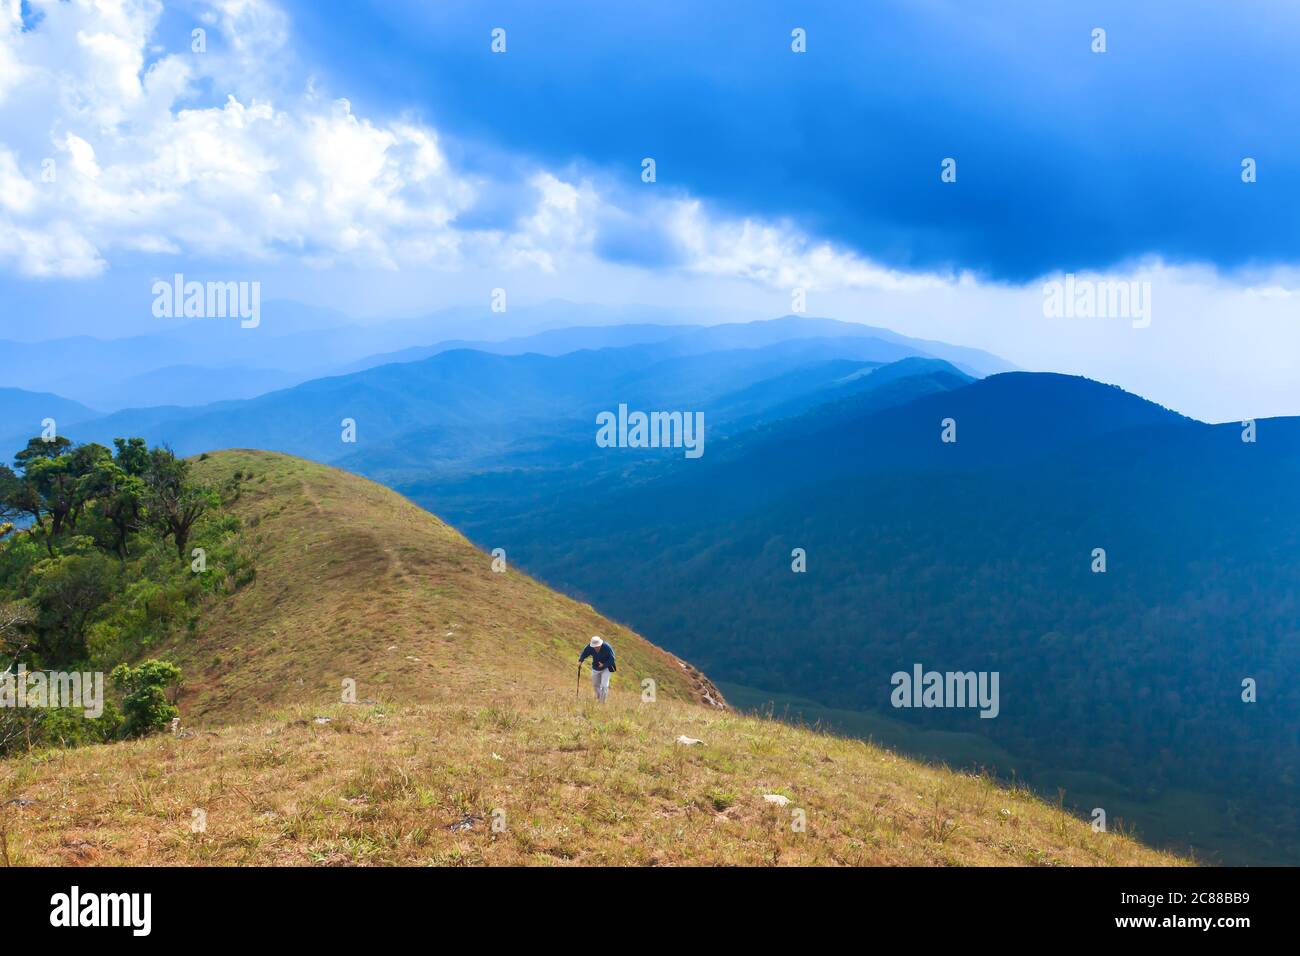 A senior man hiking with hiking pole on the peak of mountain, magical blue clouds and mountain range in the backgrounds. Stock Photo